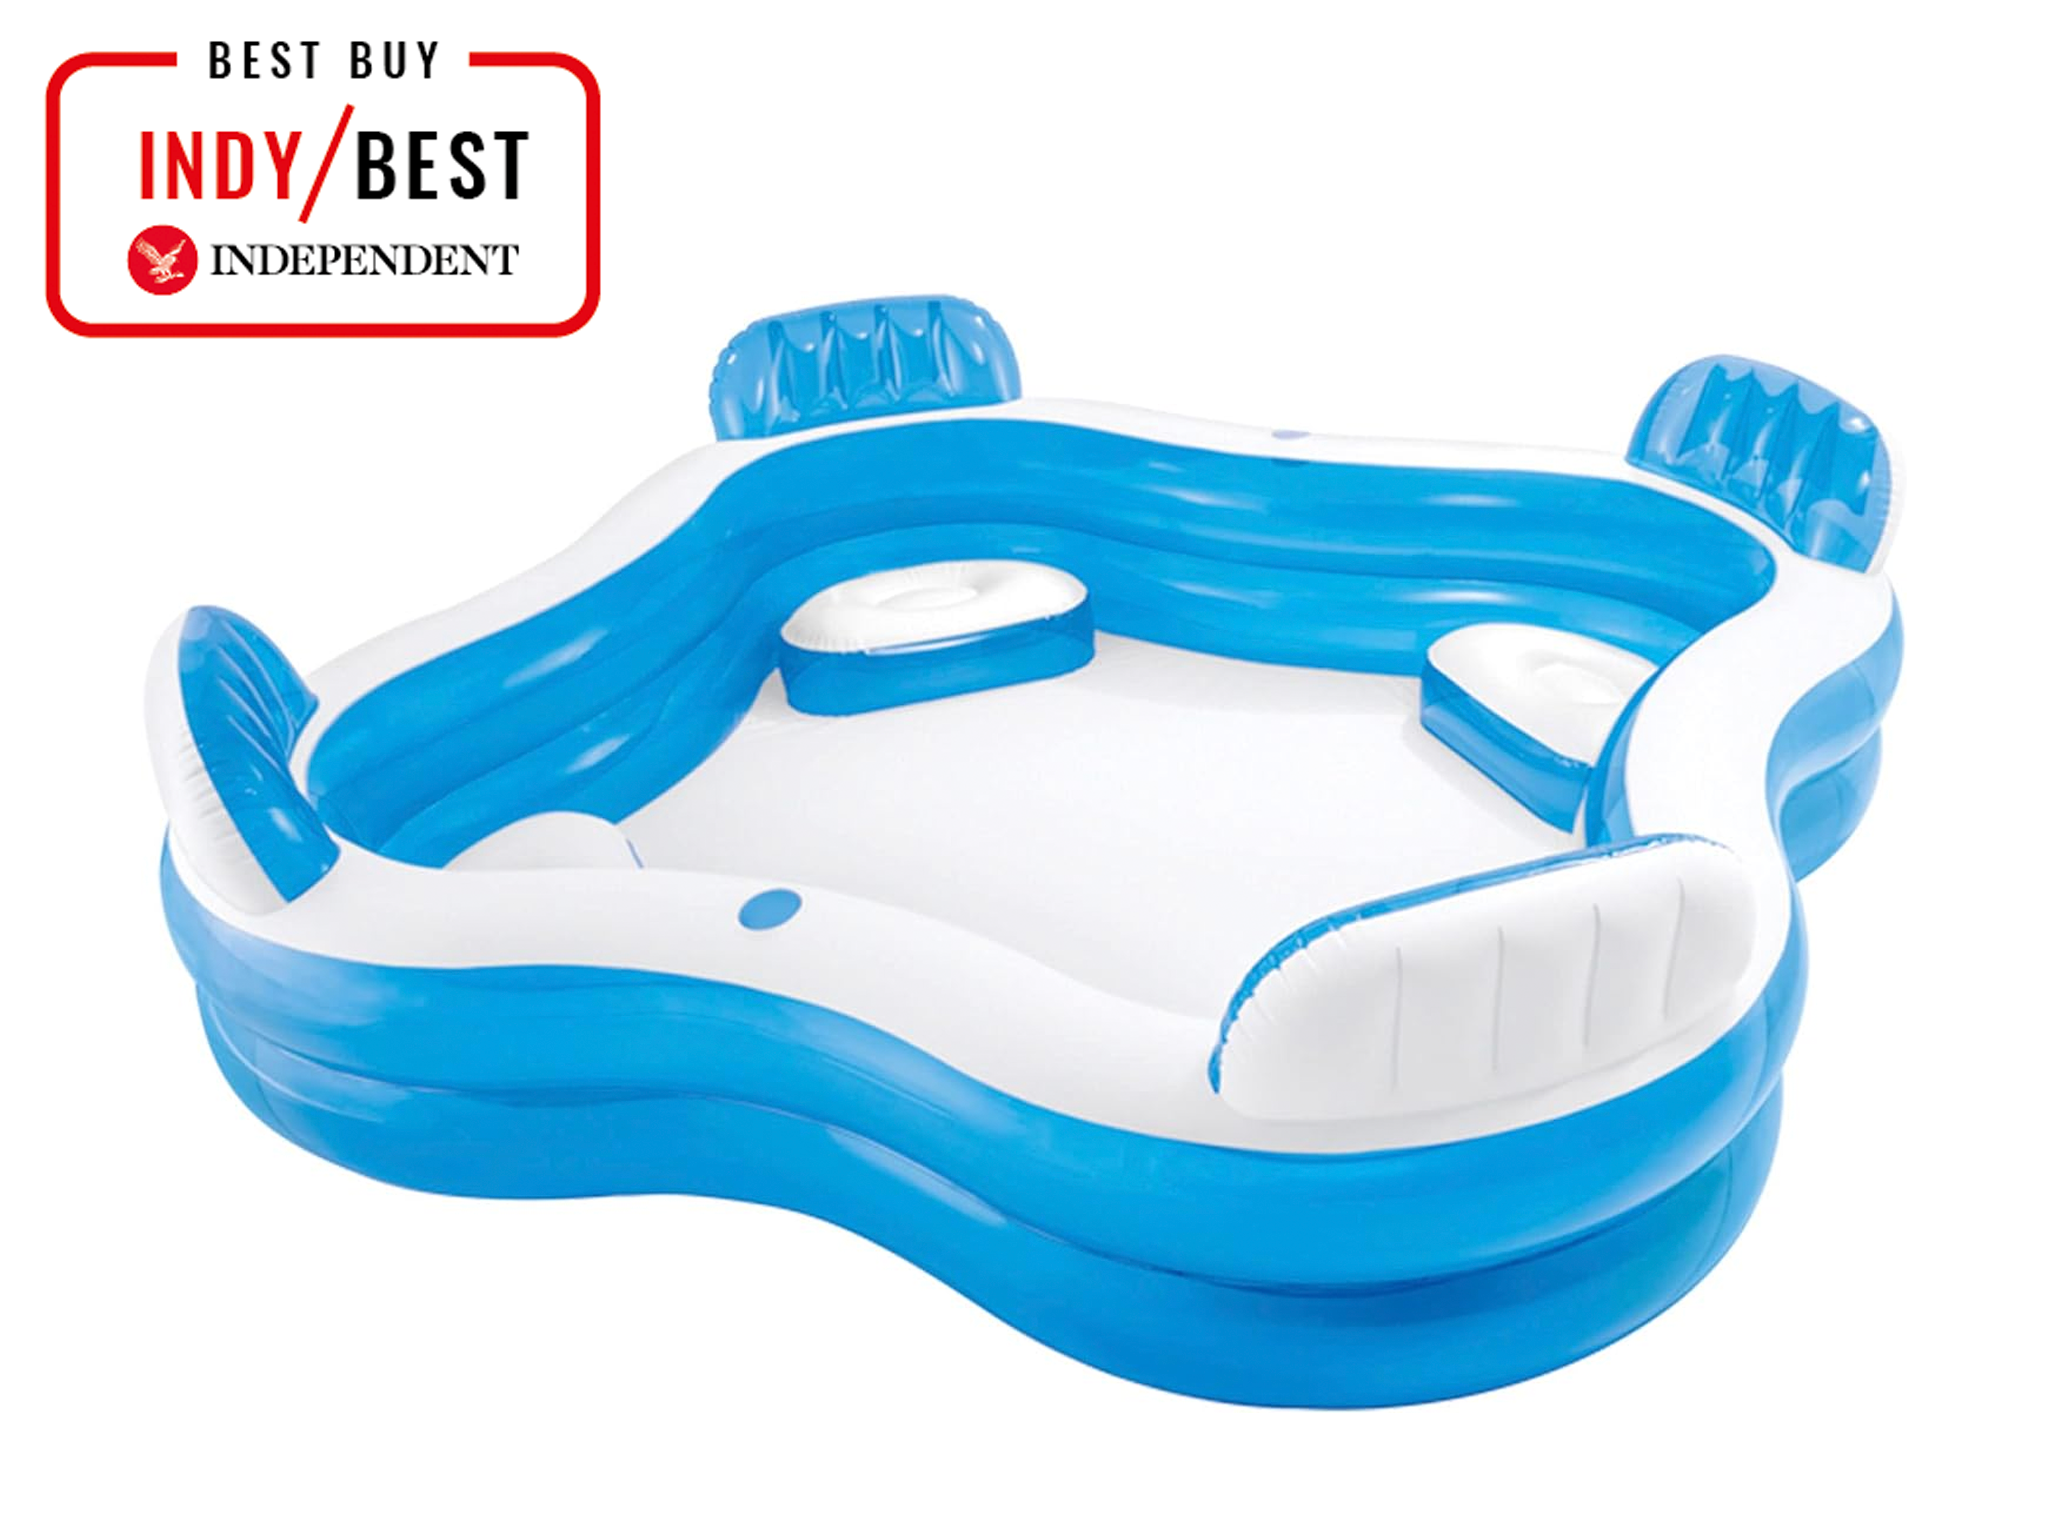 Intex-best-paddling-pools-review-indybest